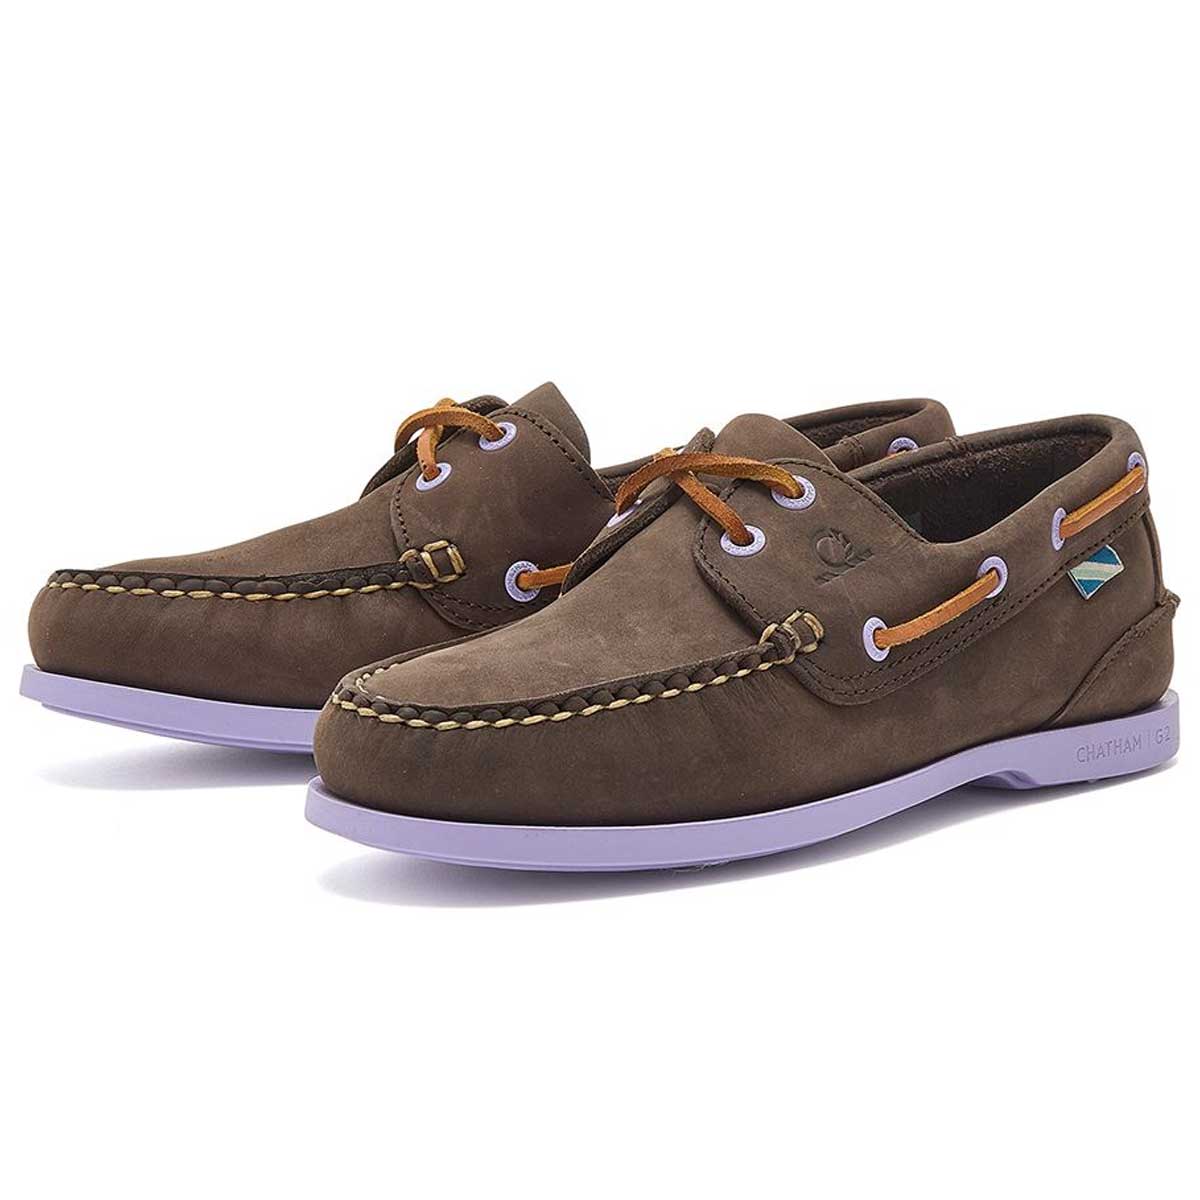 CHATHAM Pippa II G2 Leather Boat Shoes - Women's - Dark Brown / Lavender